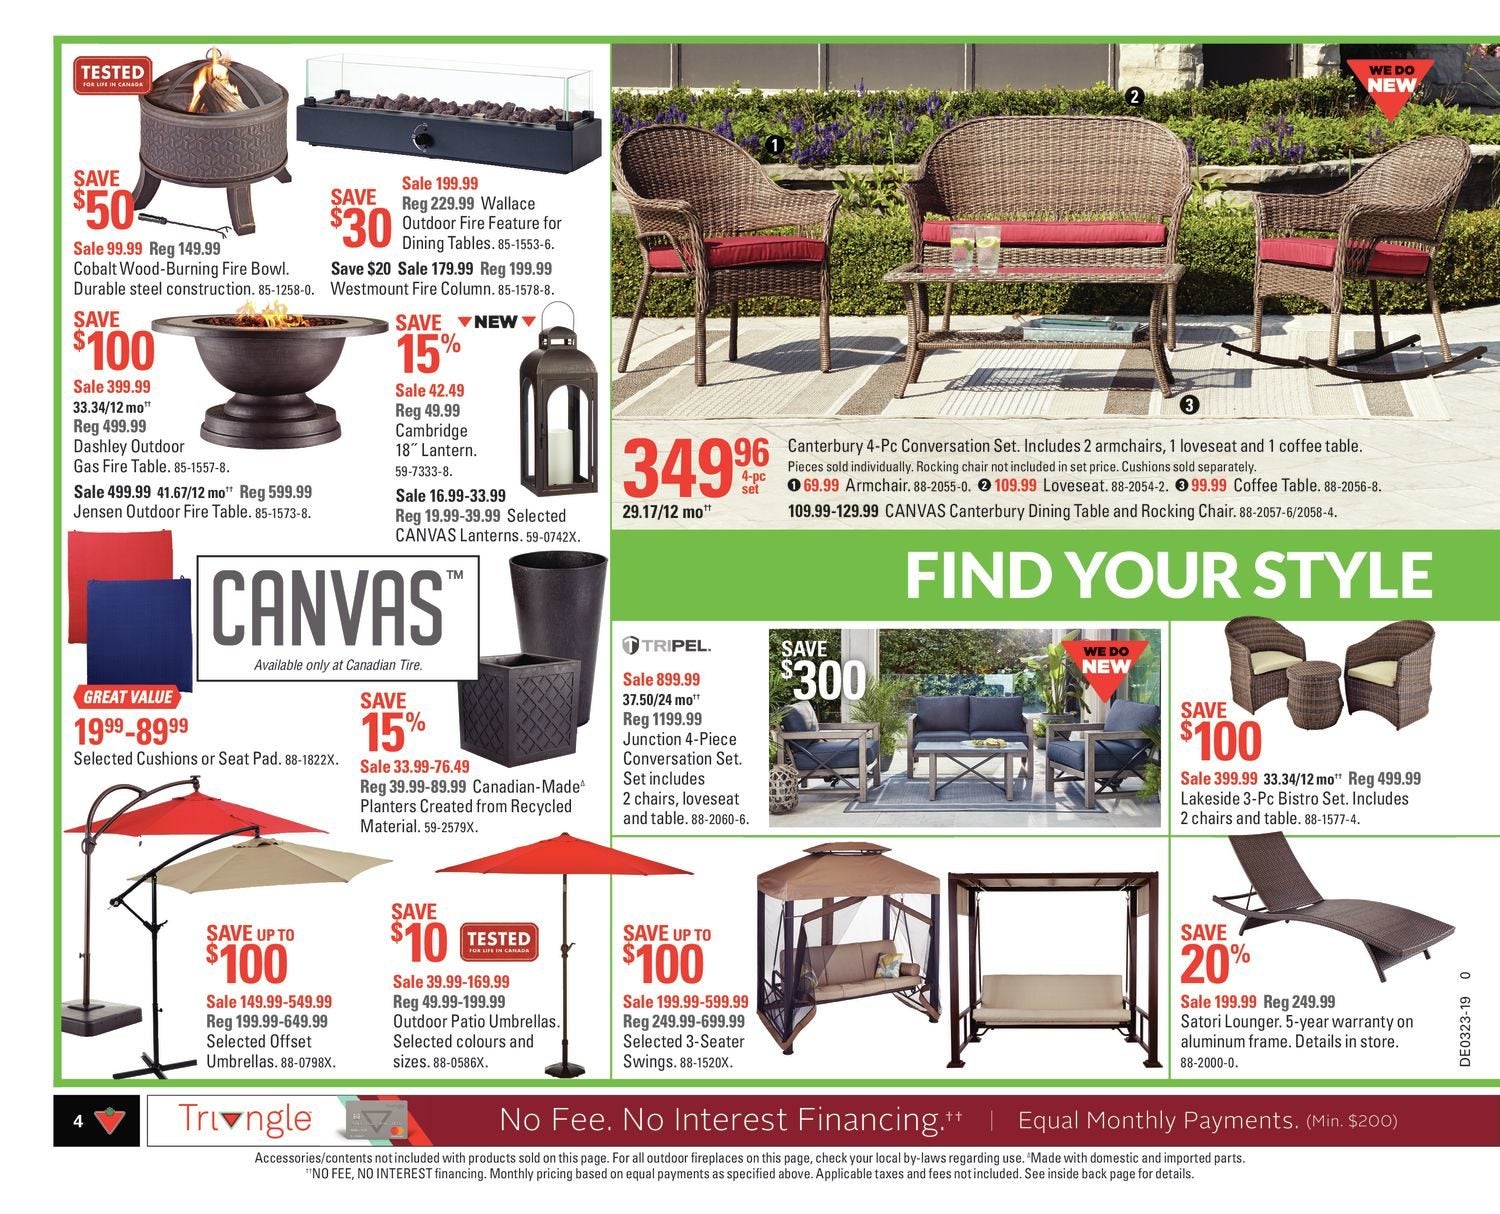 Canadian Tire Weekly Flyer Weekly Canada S Father S Day Store